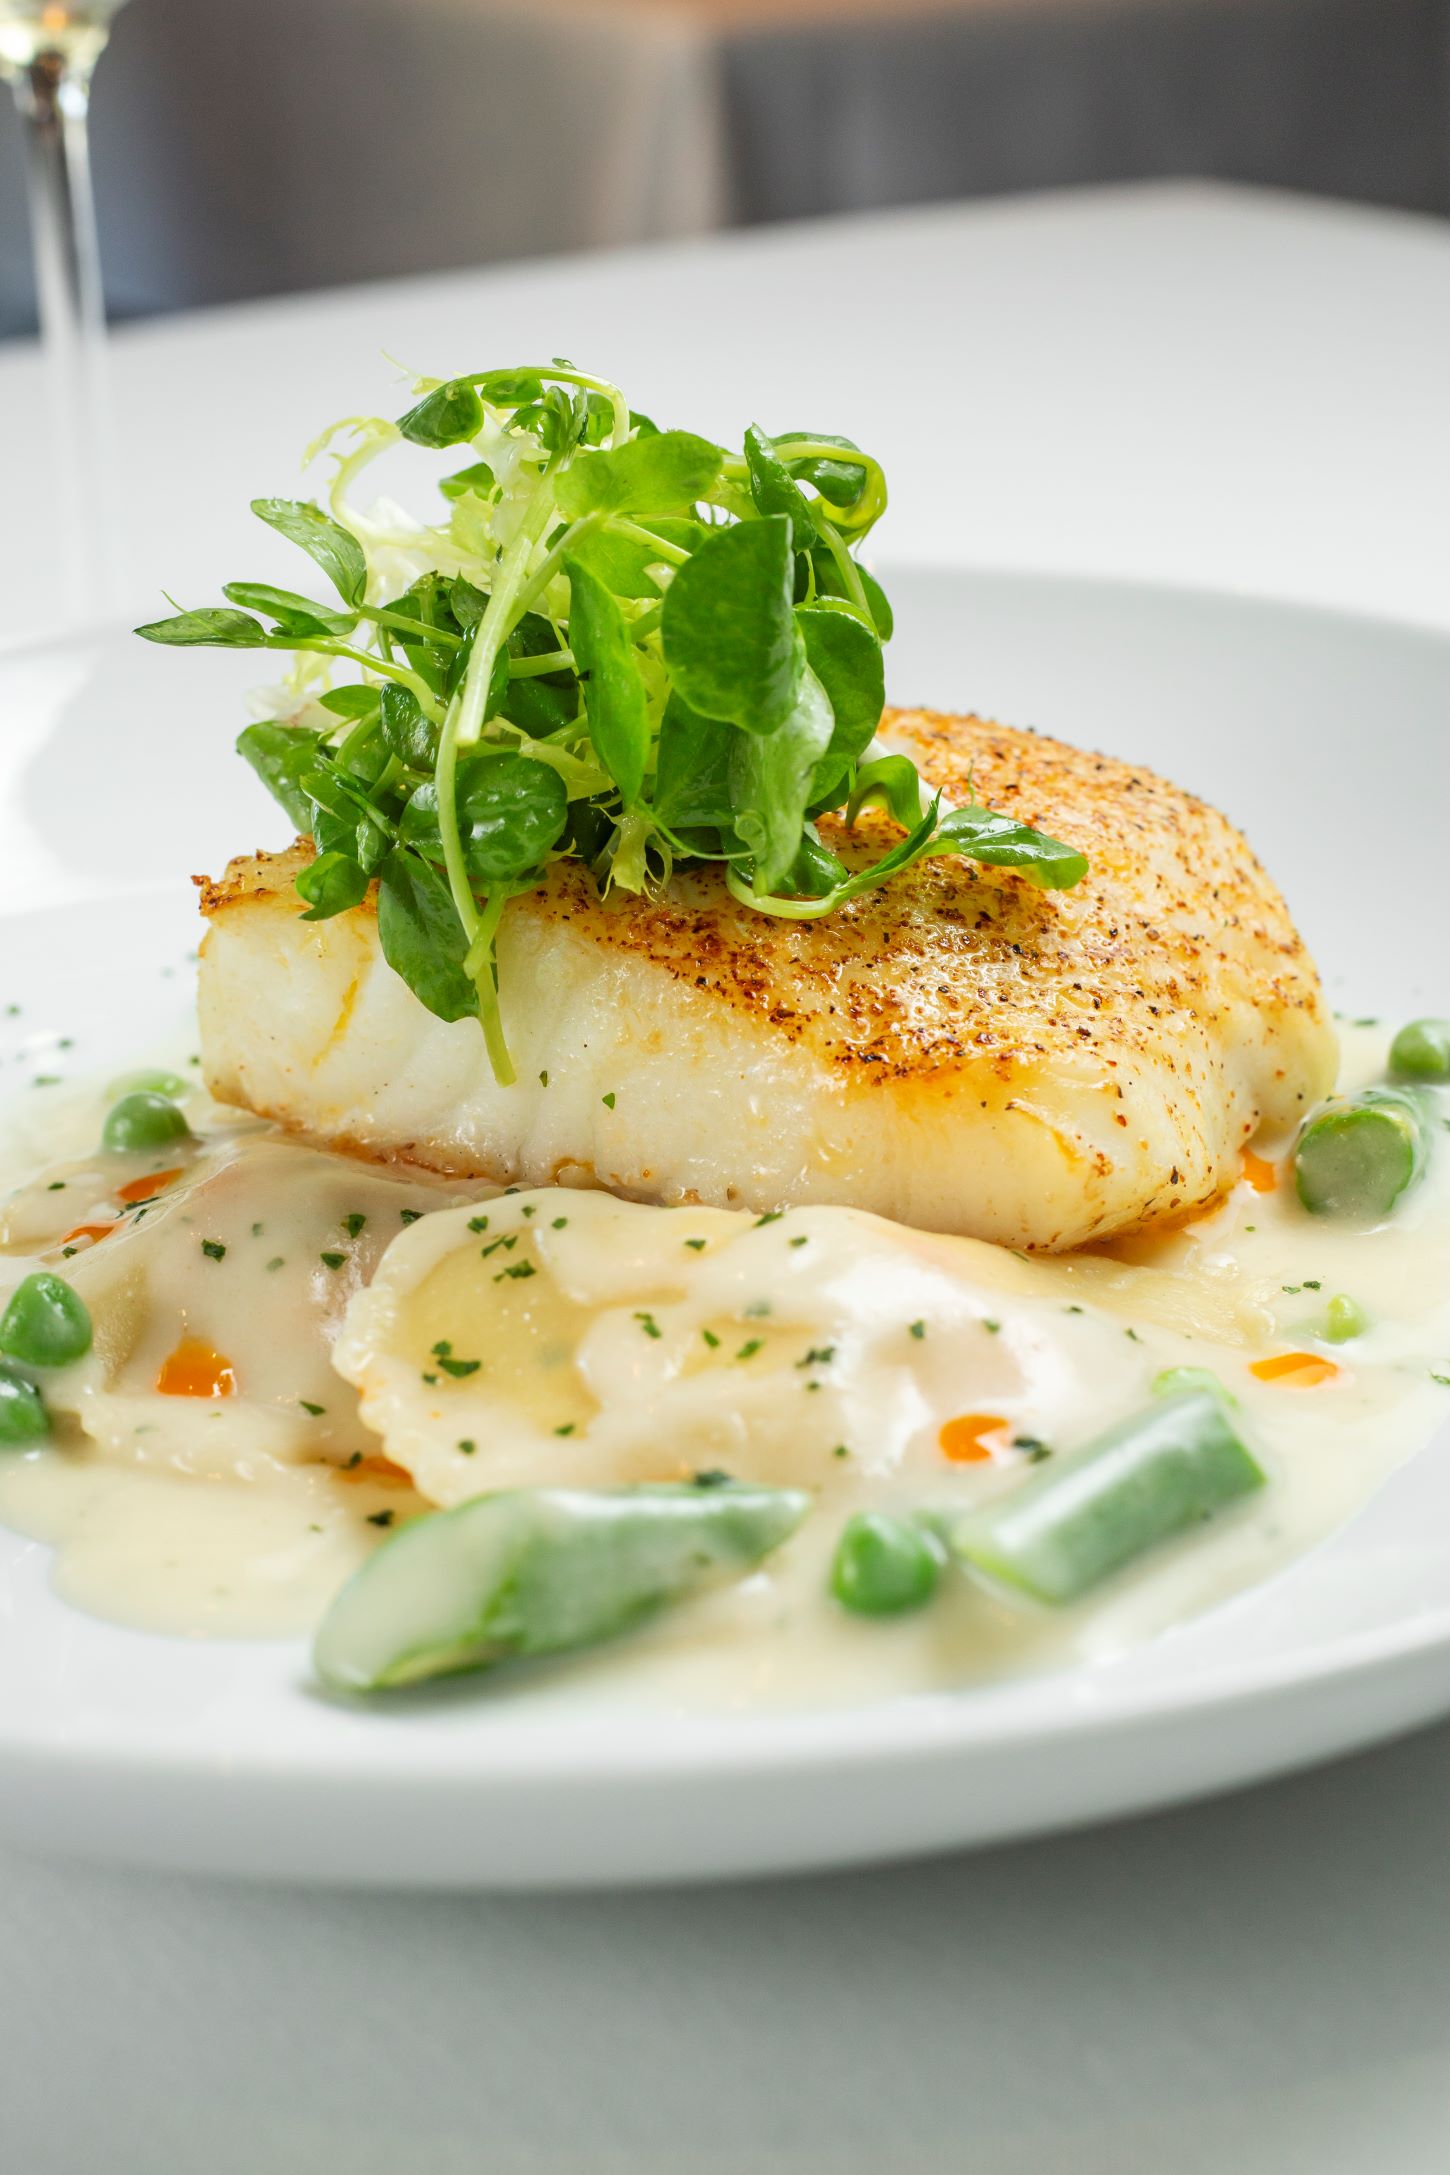 An image of the Chilean Sea Bass at Ocean Prime Beverly Hills.